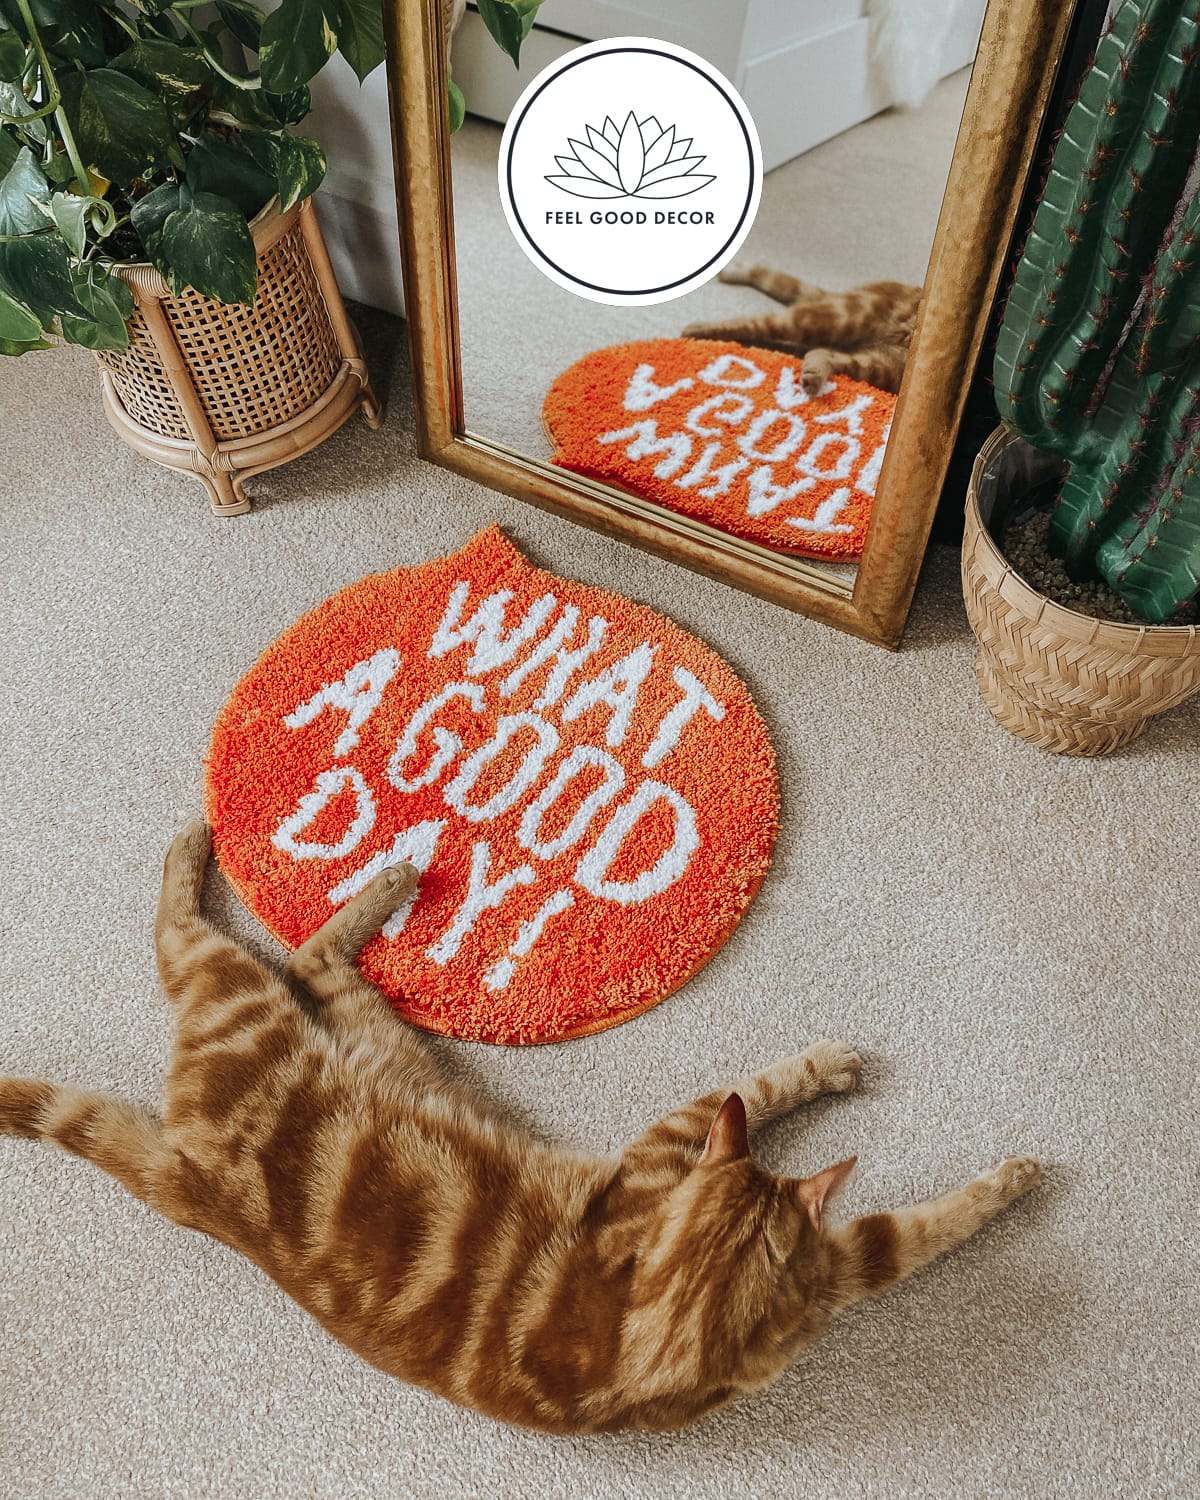 https://feelgooddecor.com/wp-content/uploads/2021/10/What-A-Good-Day-Positive-Quote-Decorative-Orange-Accent-Rug-Bath-Mat-Feel-Good-Decor2.jpg